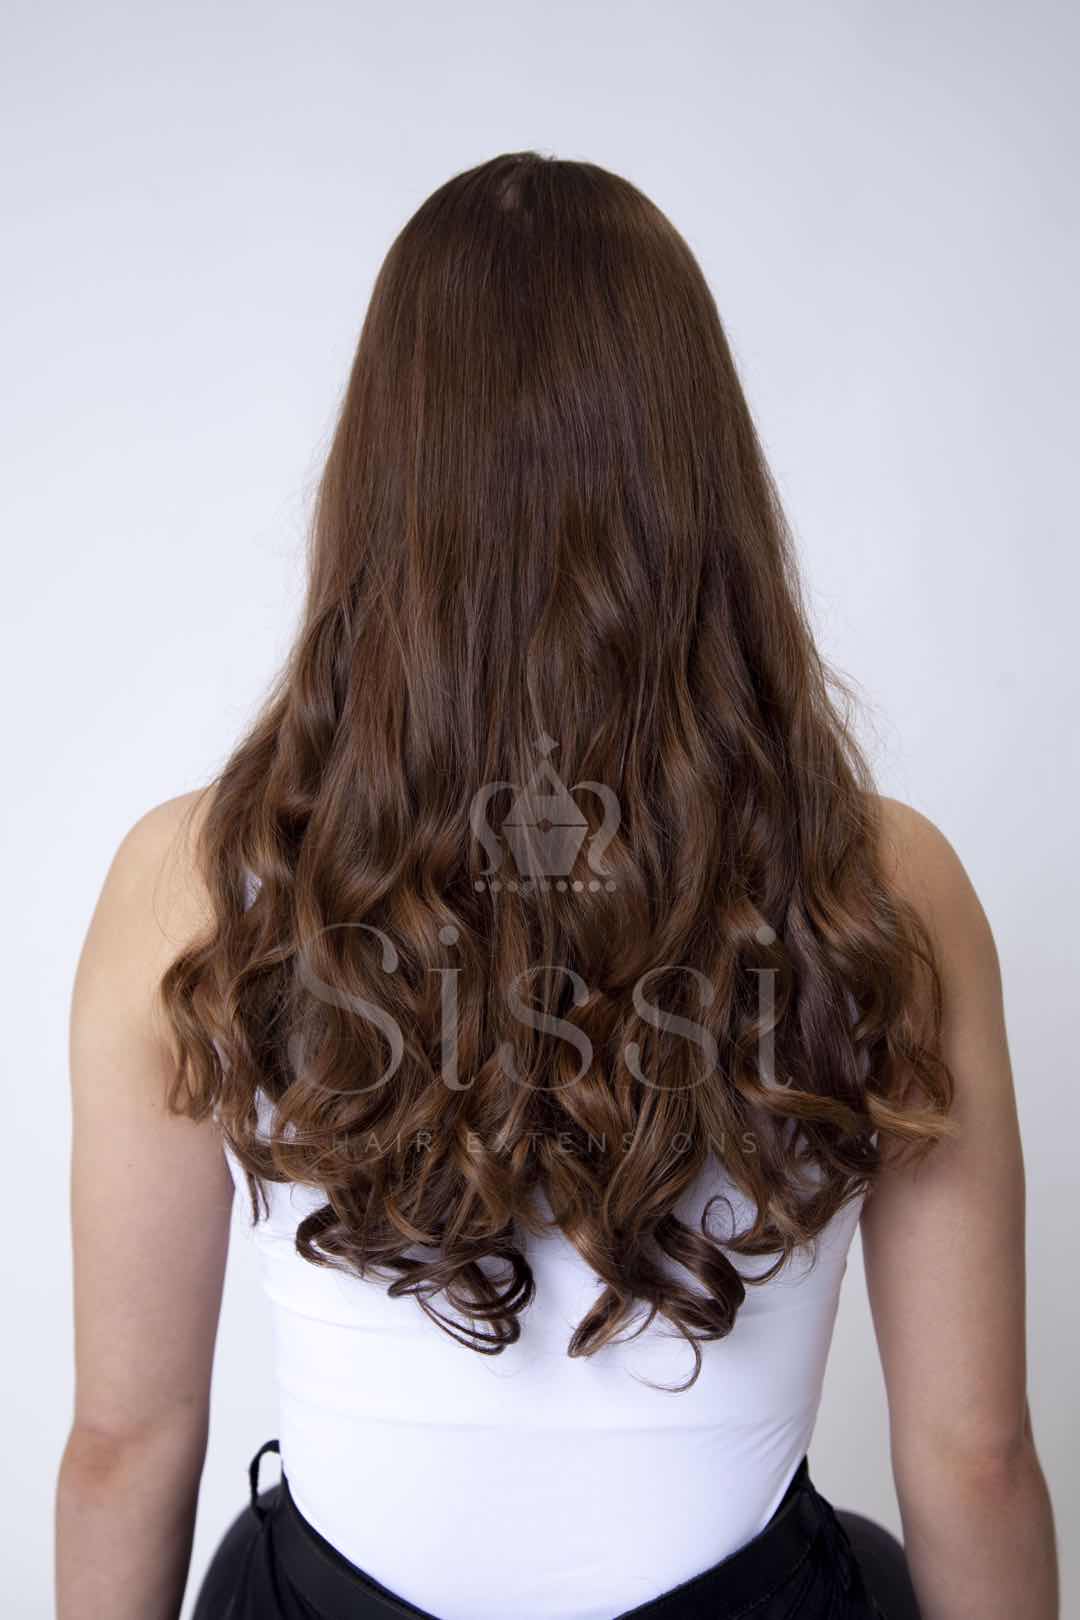 https://sissi-hair.com/media/products/sissi-hair-8b0829e0a2ba7c1c0bb1d152bd53c49df3a6a814.jpeg - Gallery #3